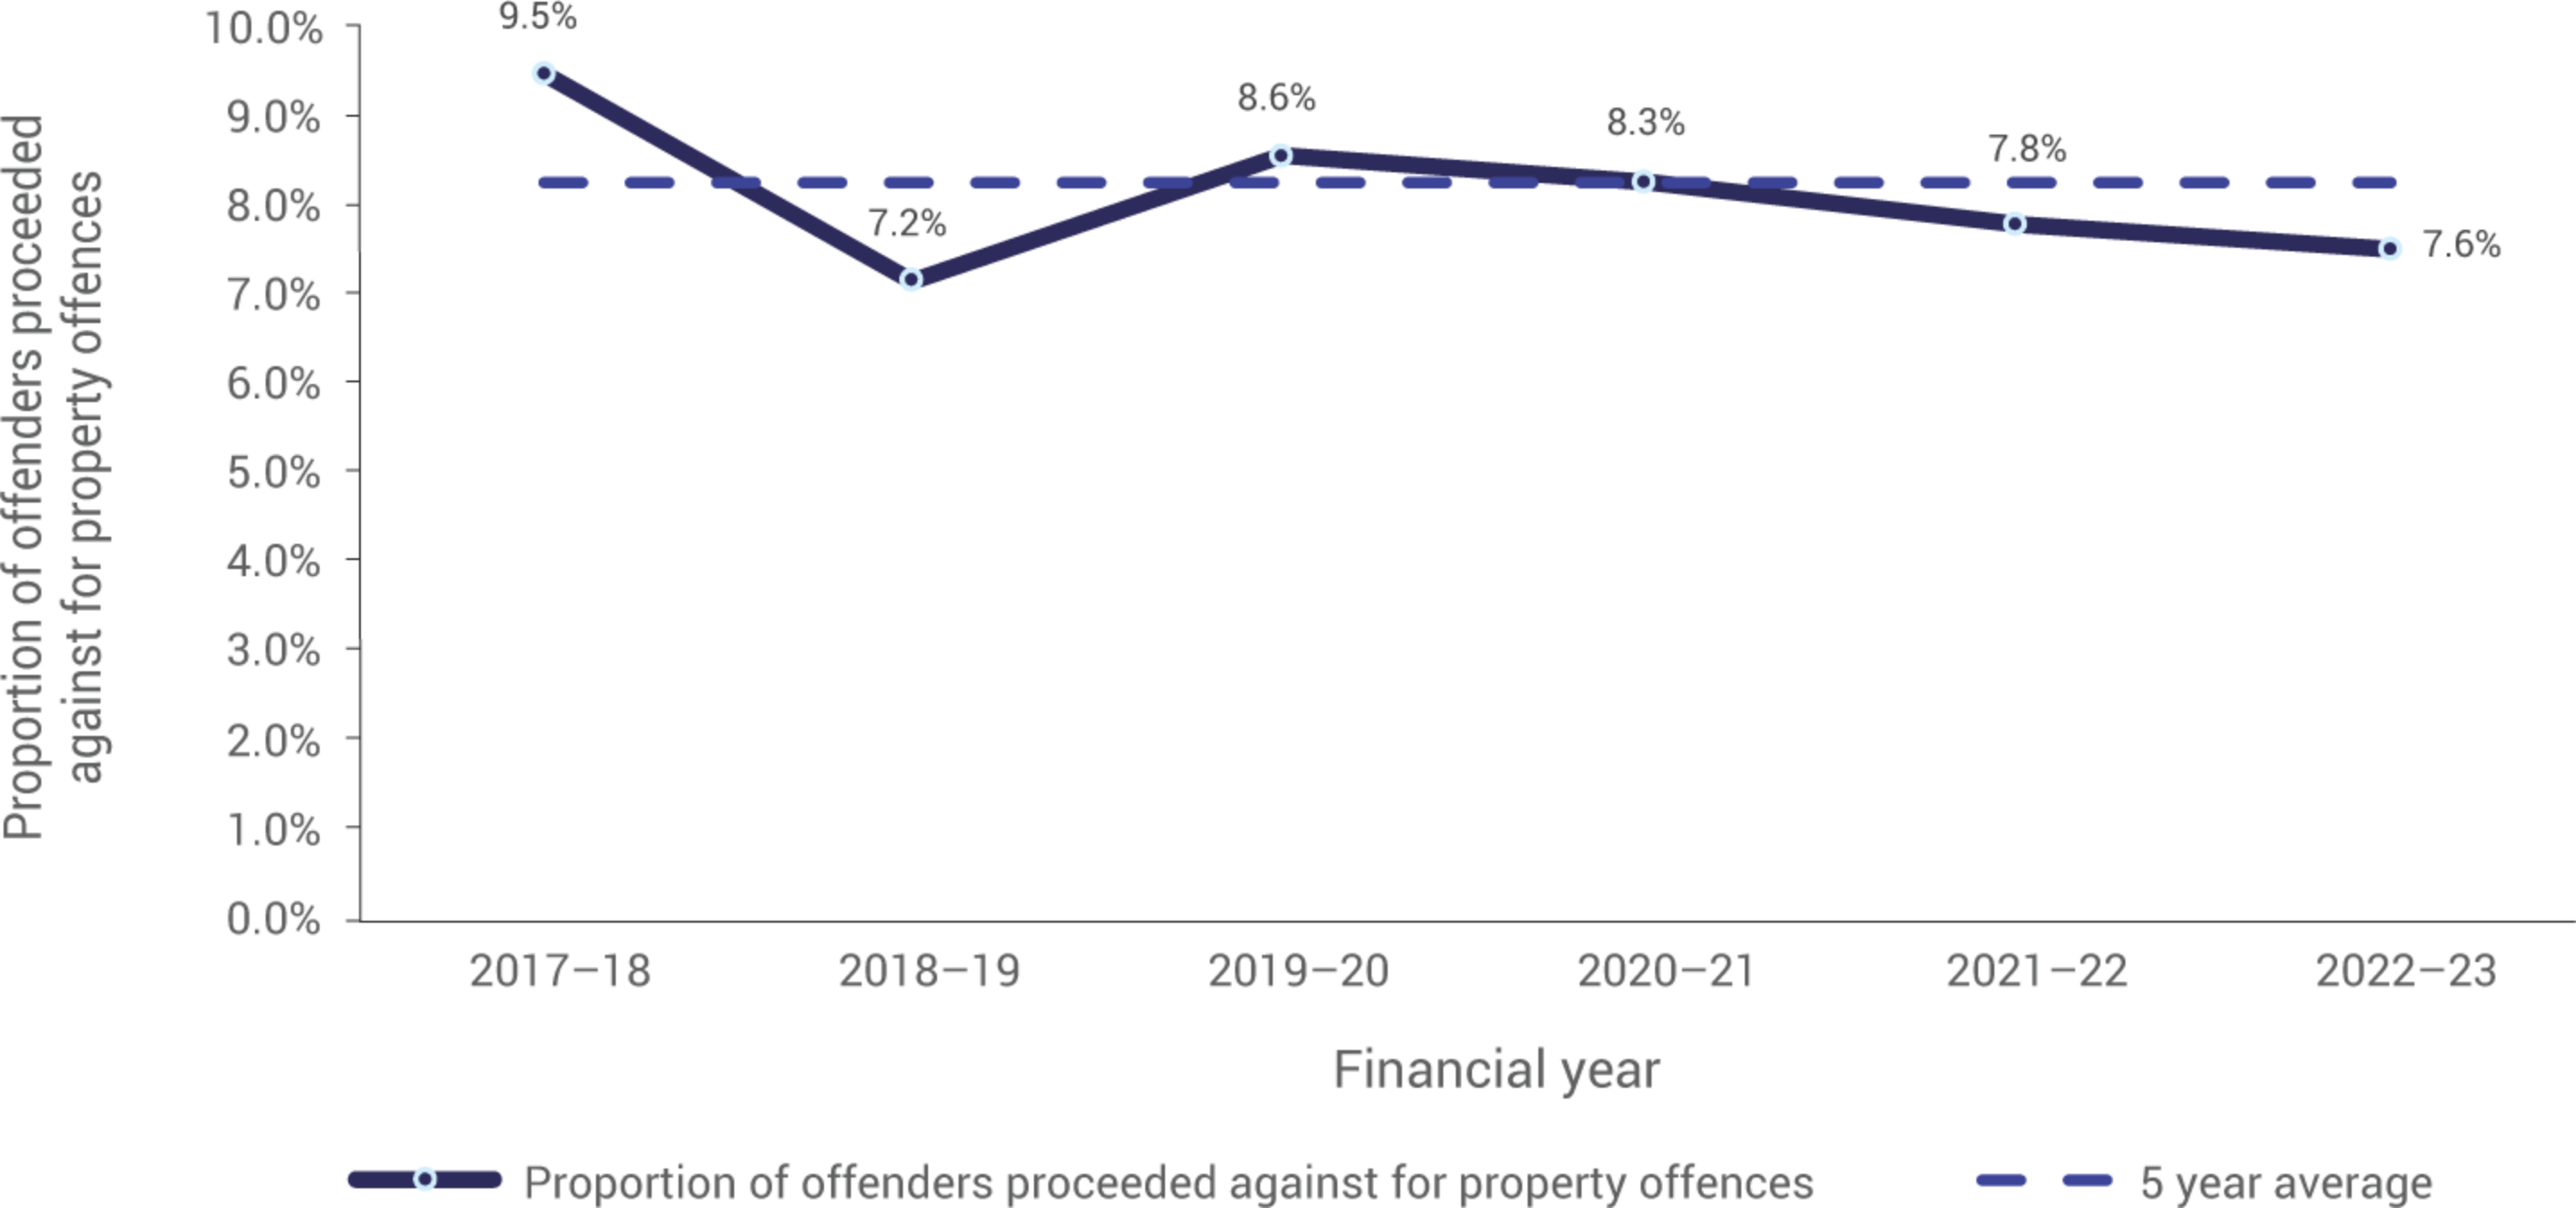 This Figure is a line graph depicting the proportion of offenders proceeded against for property offences over a six-year period, from the 2017-18 financial year to the 2022-23 financial year.